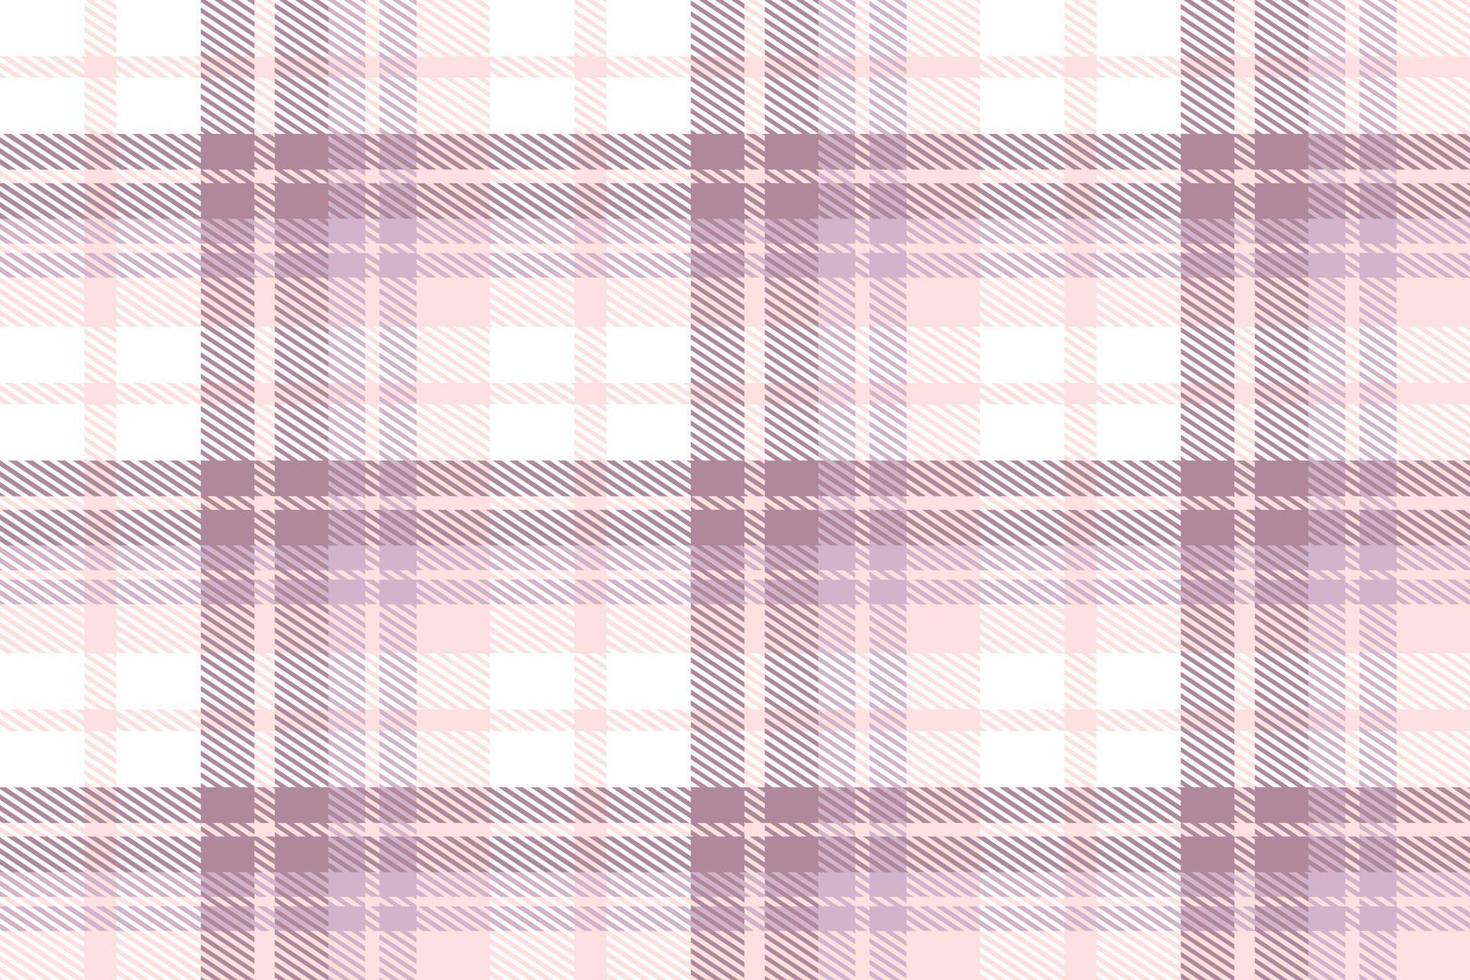 Purple Plaid Tartan Pattern Design Textile Is a Patterned Cloth Consisting of Criss Crossed, Horizontal and Vertical Bands in Multiple Colours. Tartans Are Regarded as a Cultural Scotland. vector